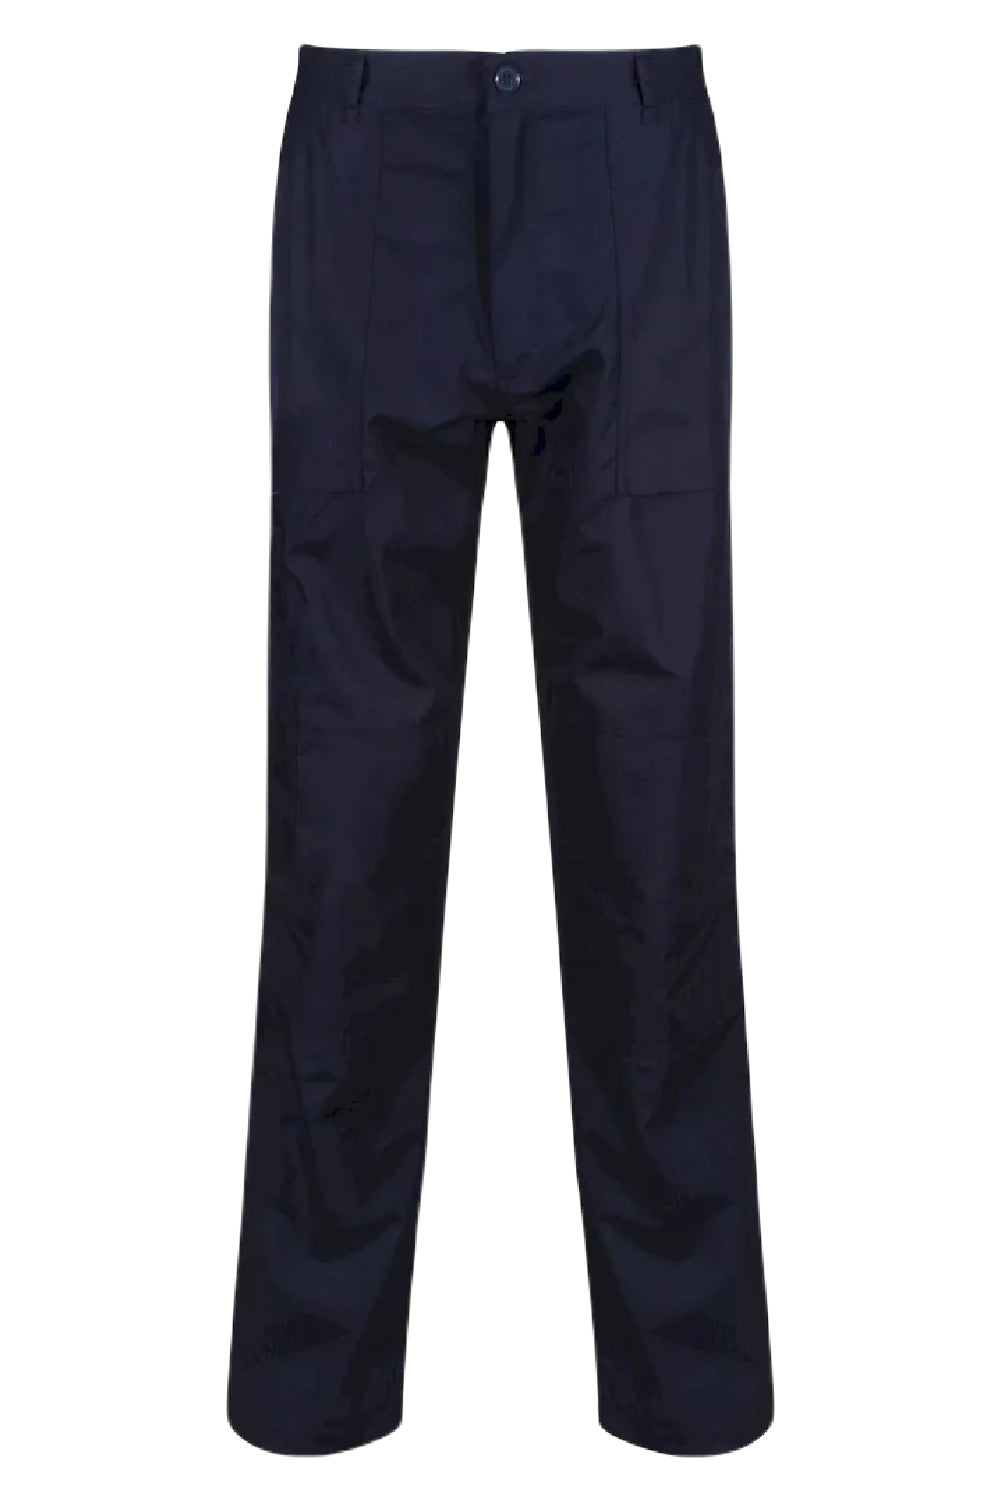 Regatta Mens Action Trousers in Navy 